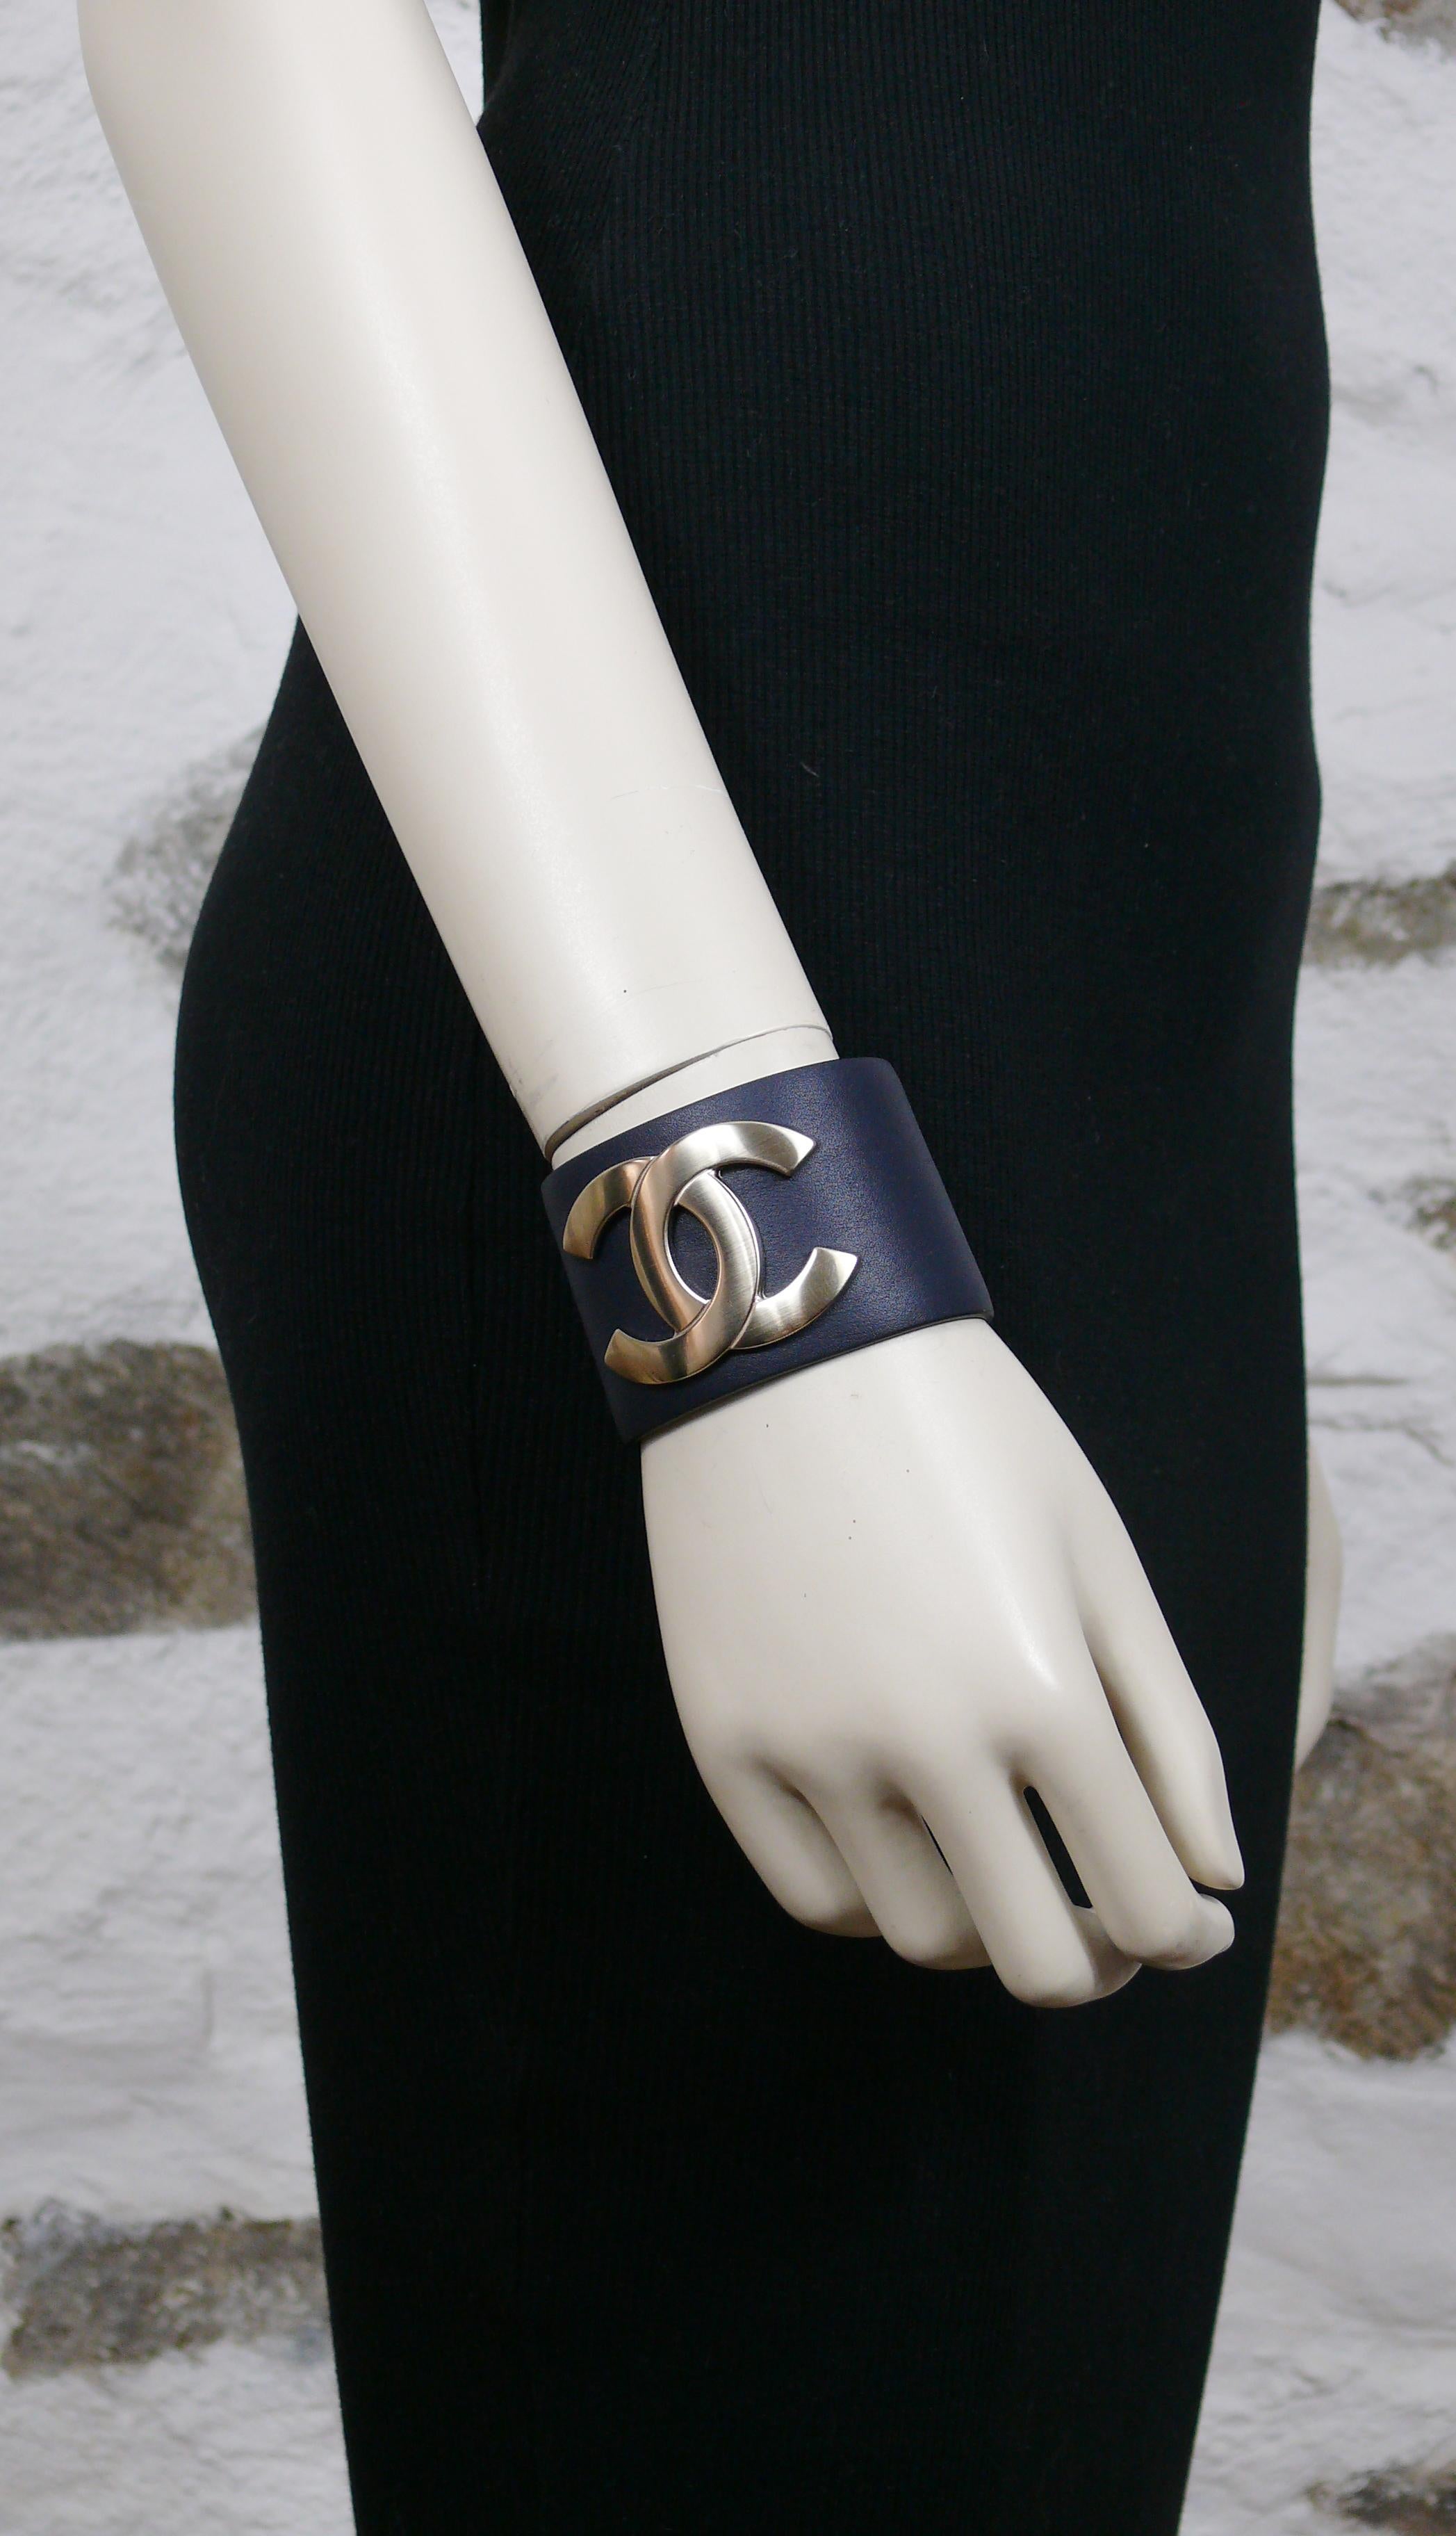 ****** IMPORTANT INFORMATION ******
Please note that the true color of this cuff is DARK NAVY BLUE - NOT black !

CHANEL dark navy blue wide leather cuff bracelet featuring a pale gold toned CC logo at the centre.

Exclusive Edition December